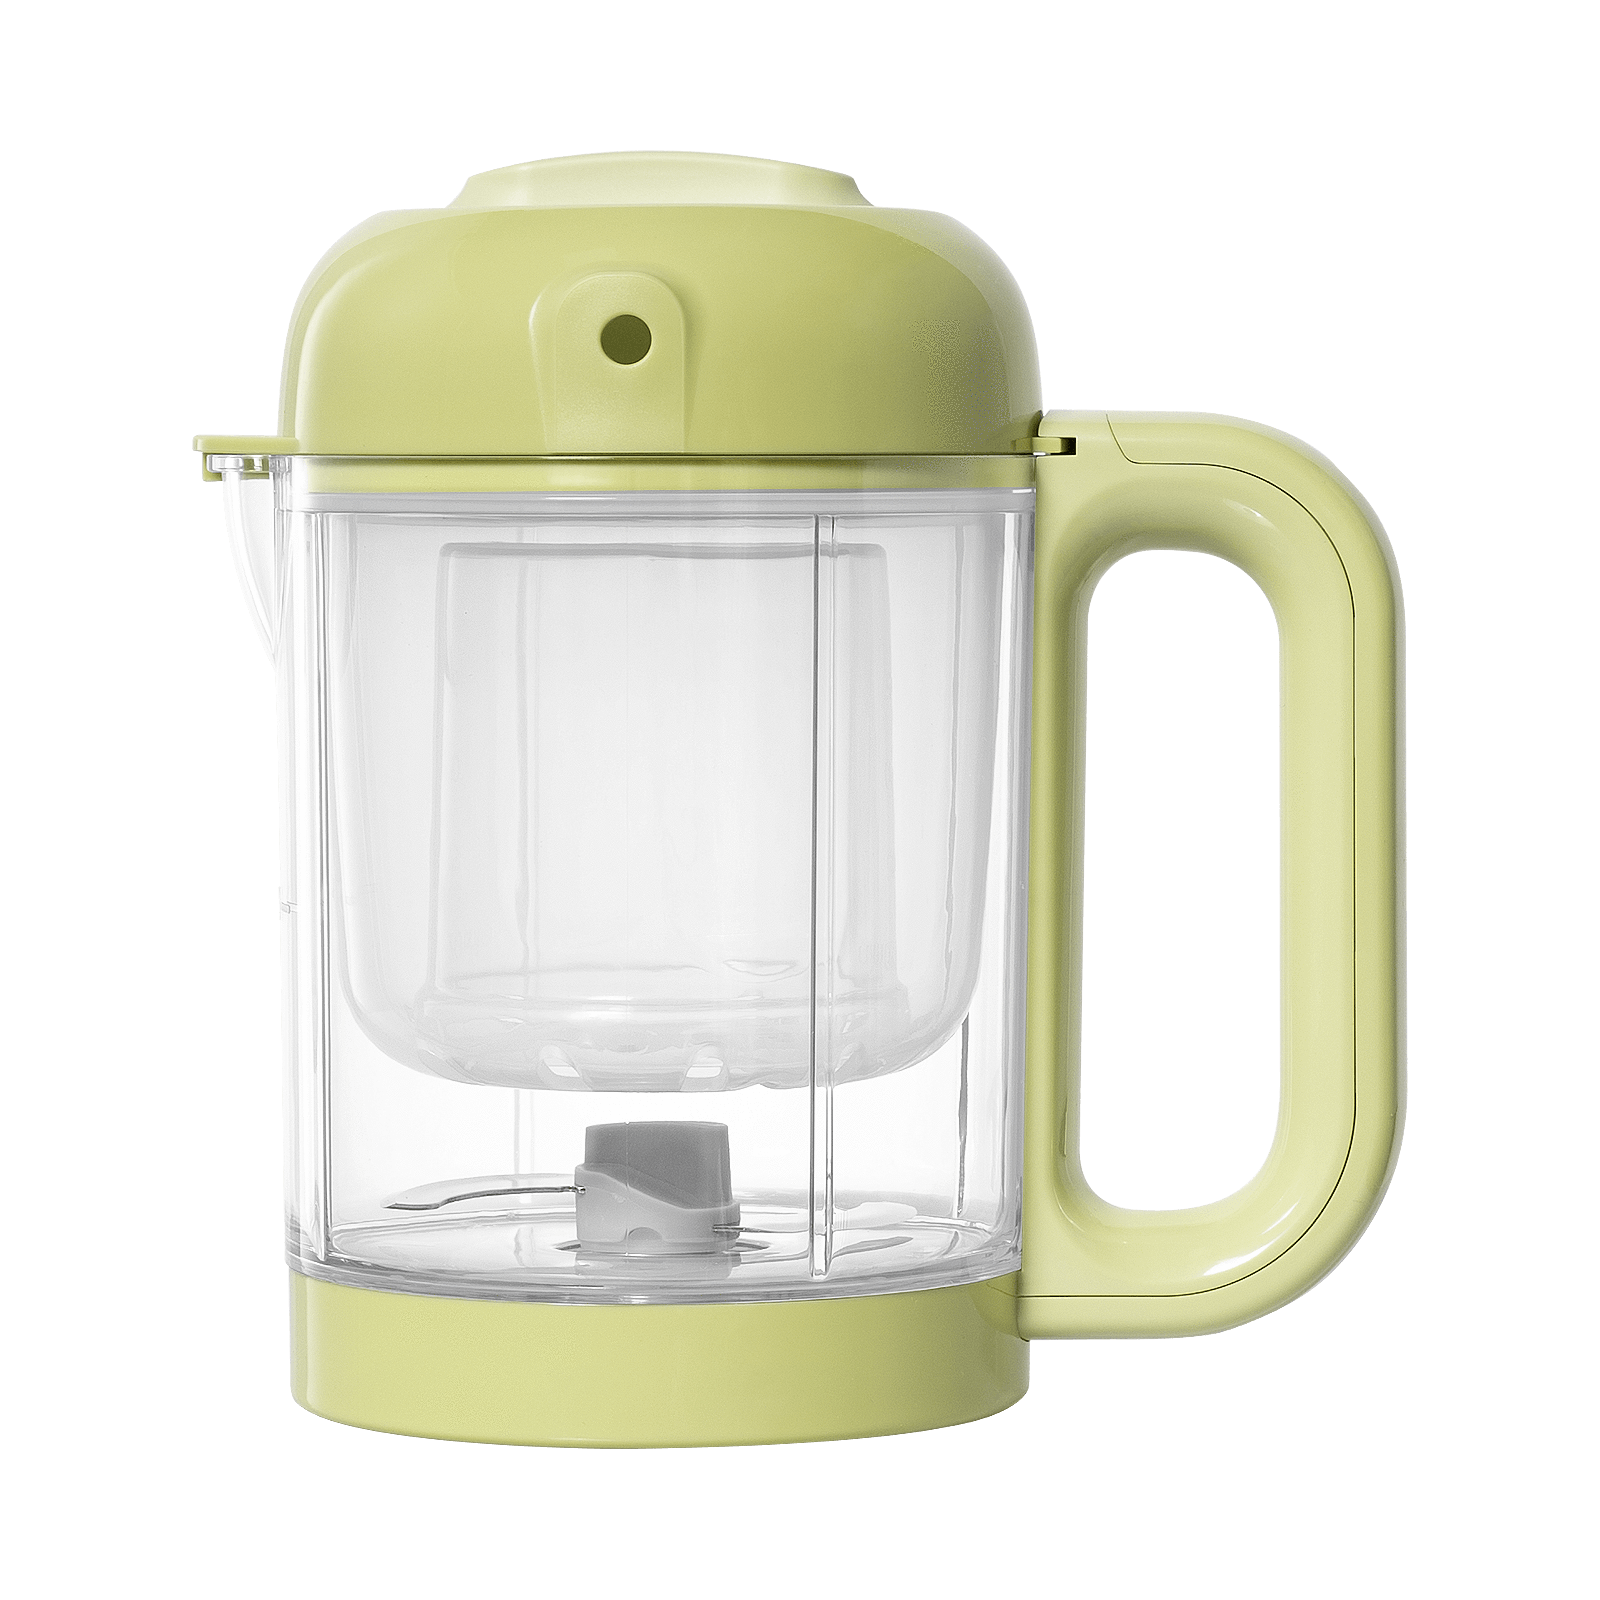 Ventray Baby Food Maker BPA-Free Steamer & Blender All-in-One Baby Food Processor - Green